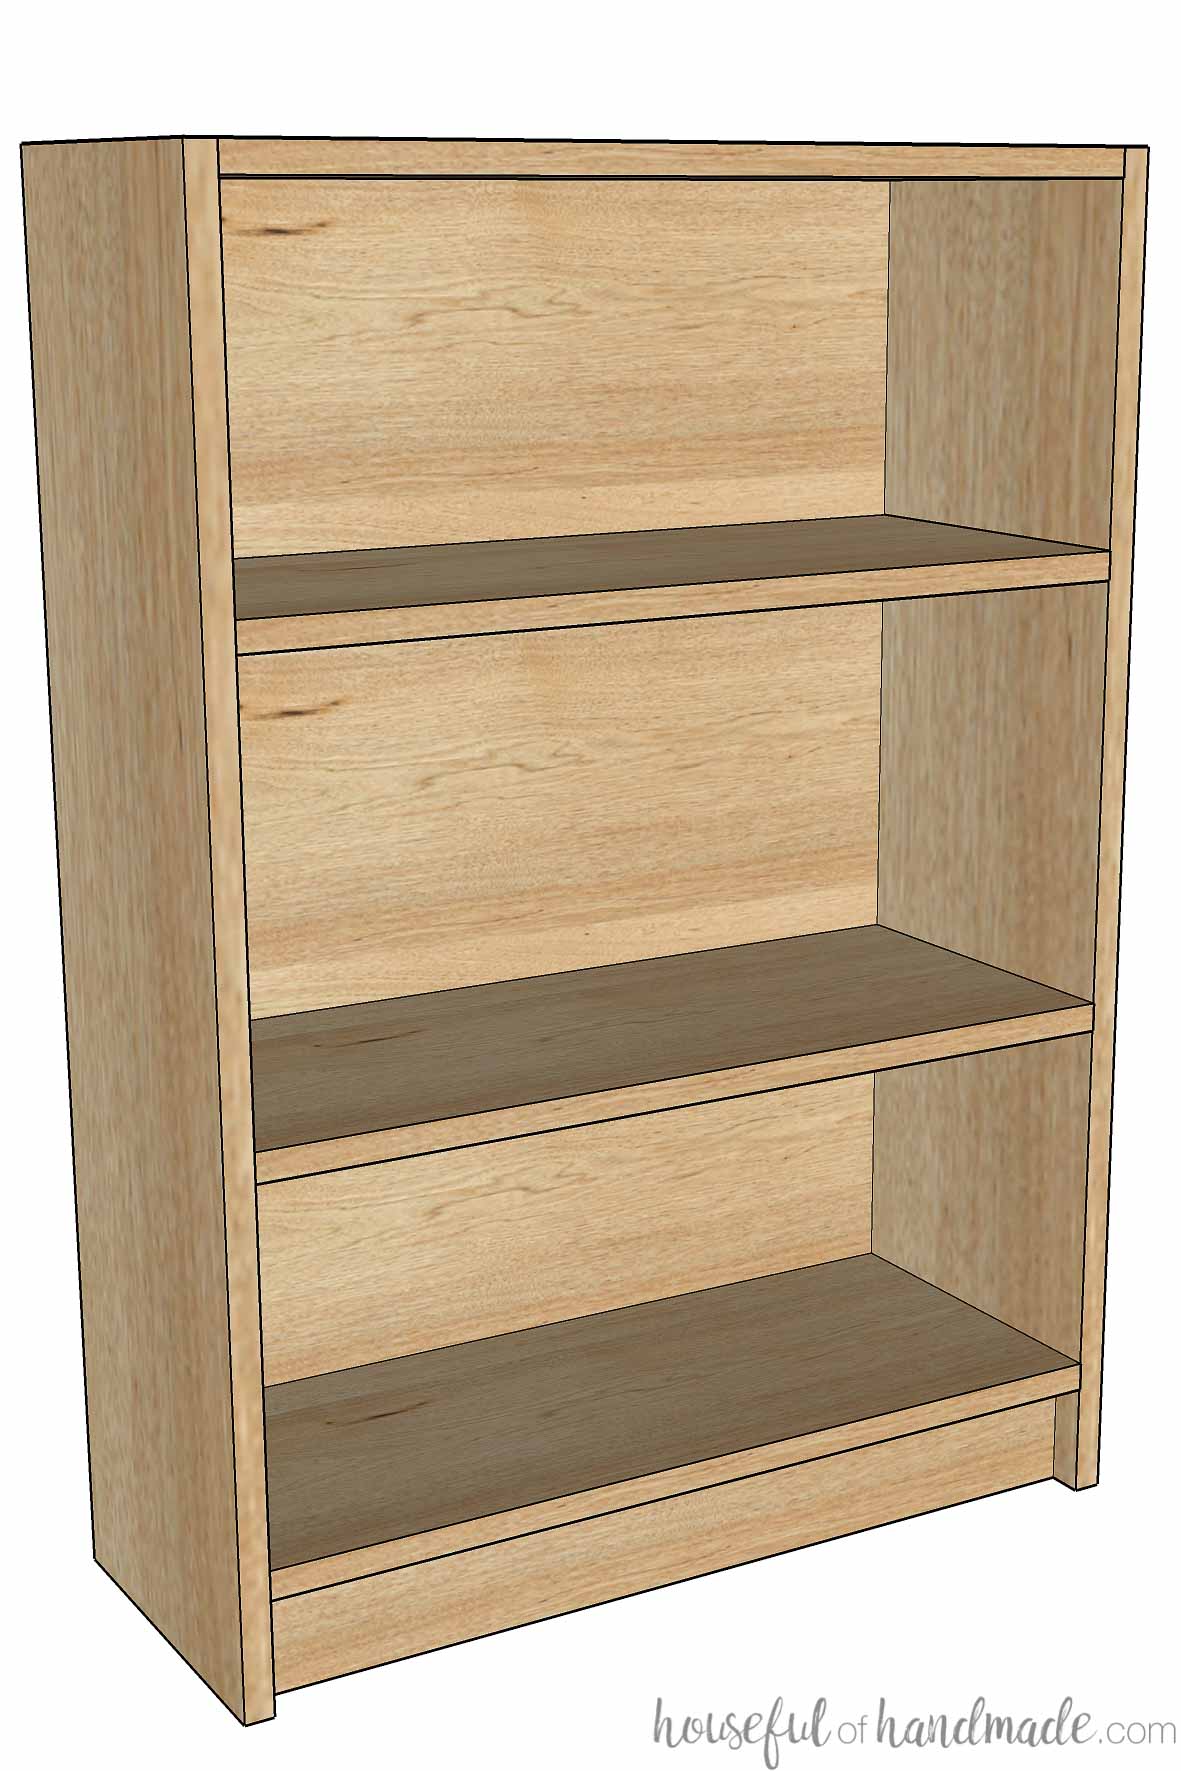 Frameless bookcase with a small toe kick on the bottom. 